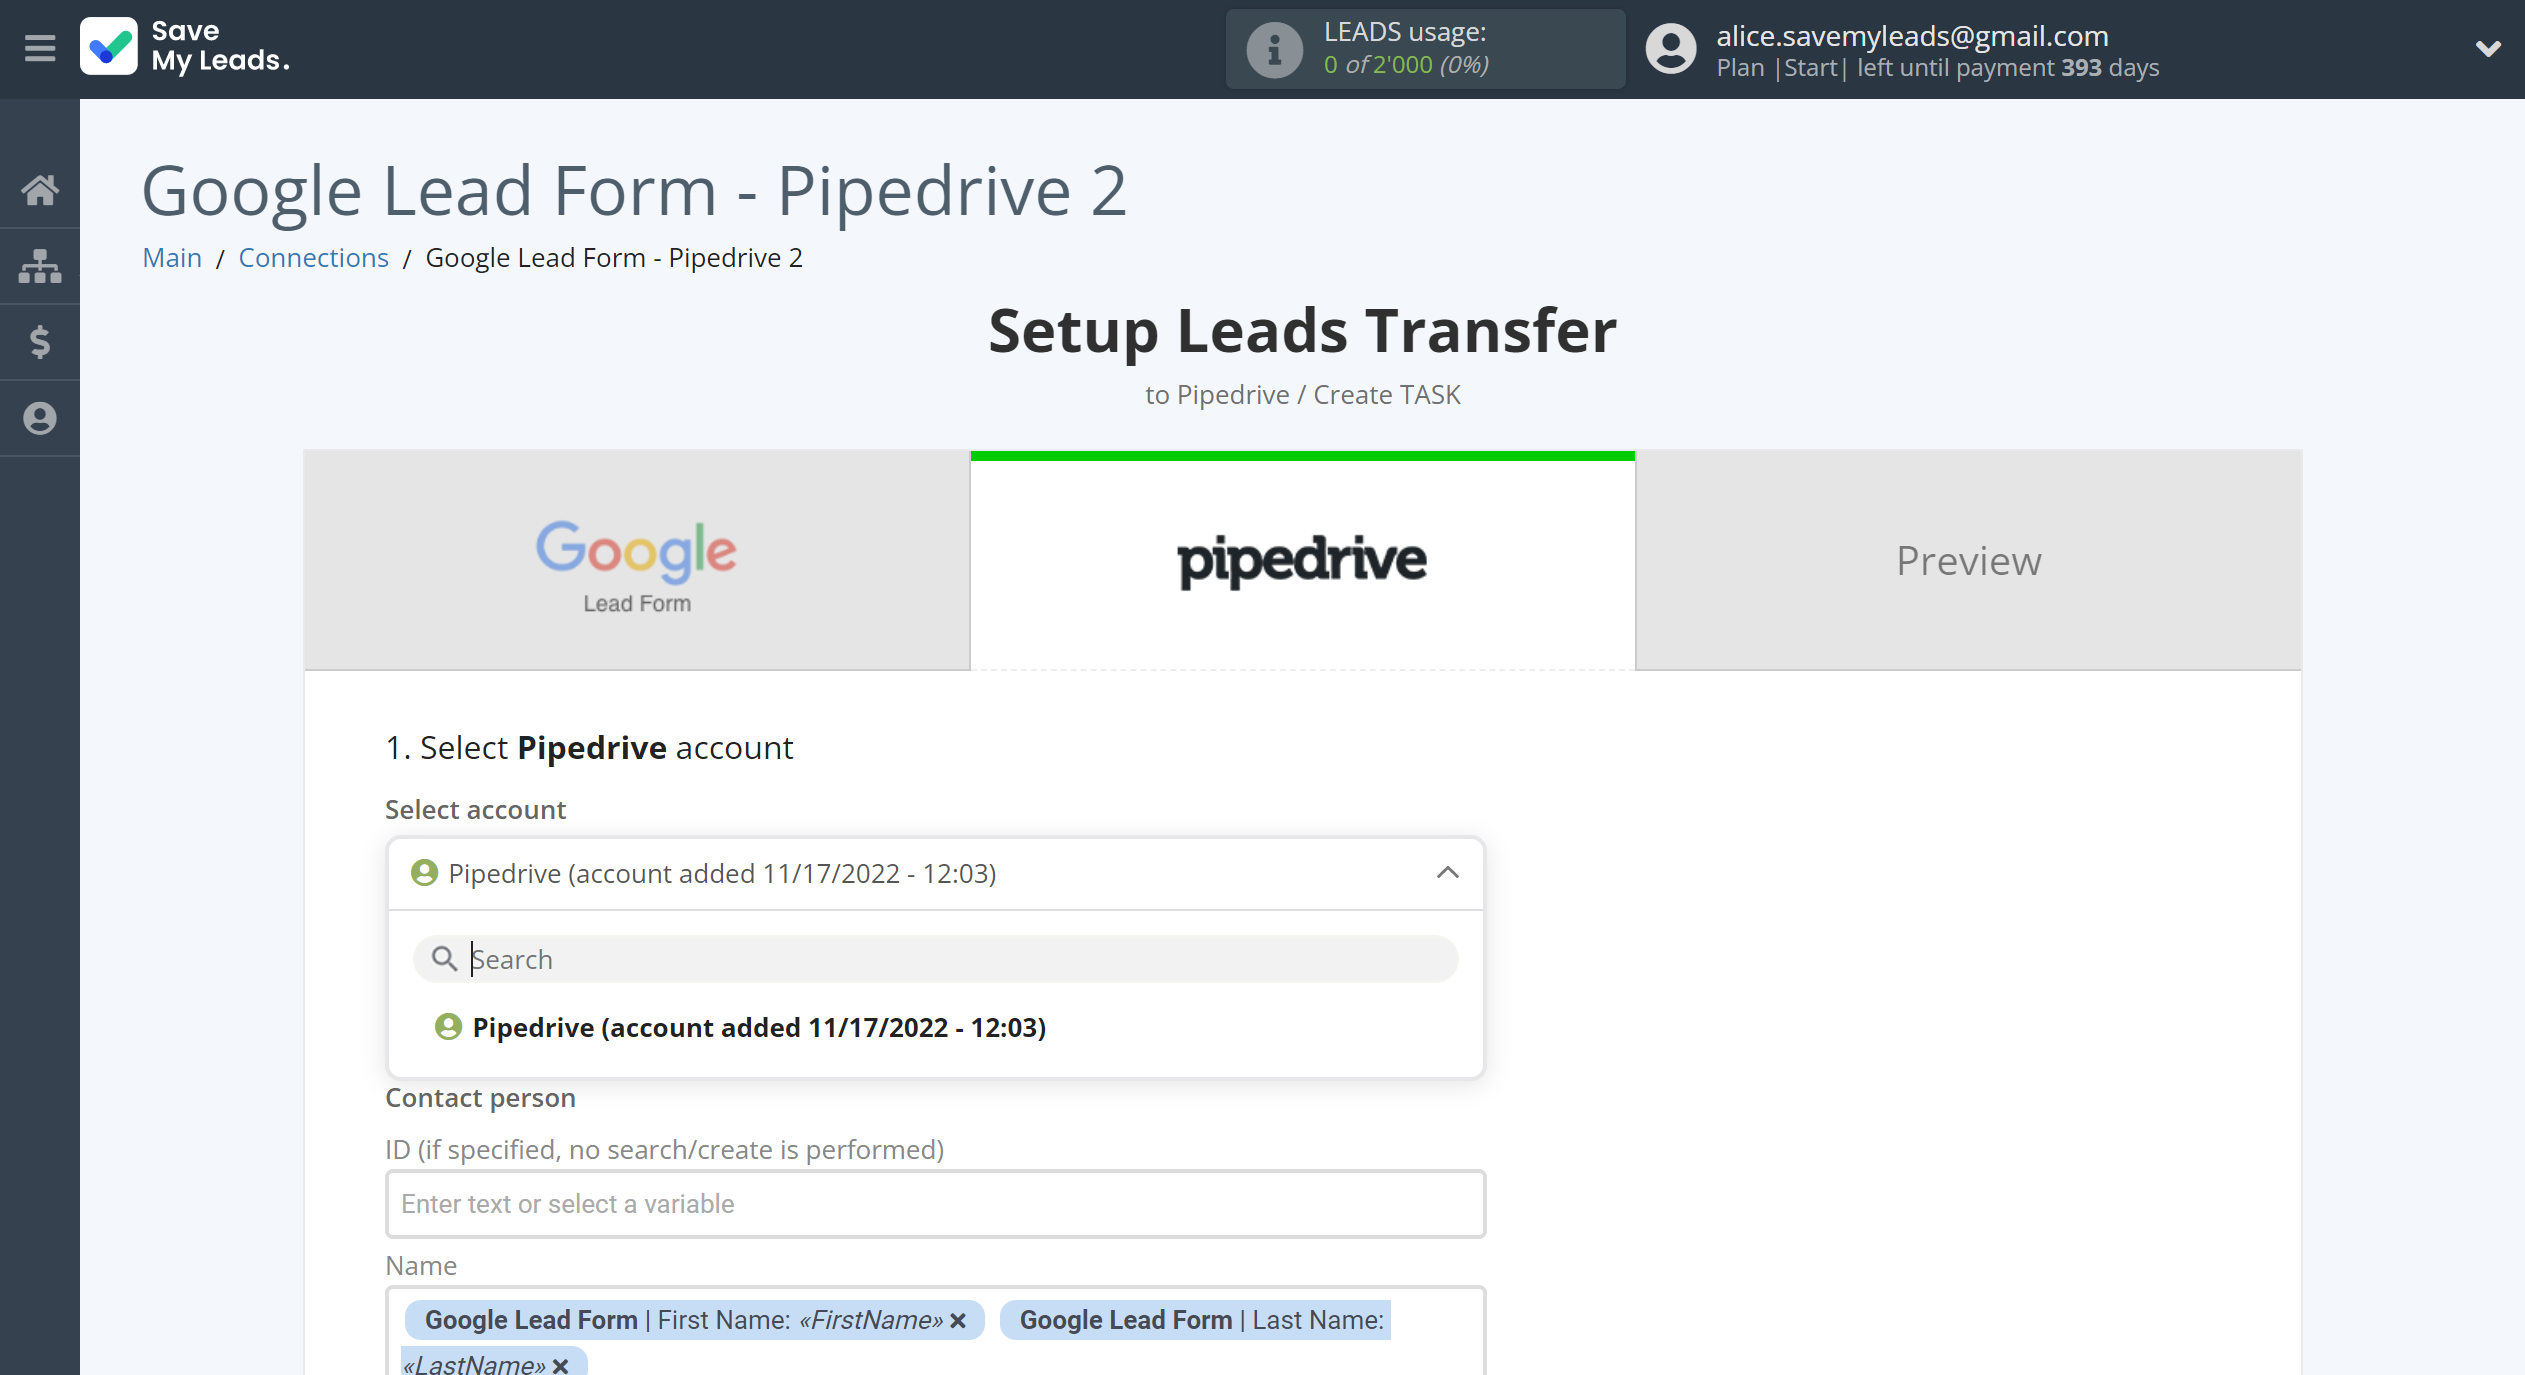 How to Connect Google Lead Form with Pipedrive Create Task | Data Destination account selection